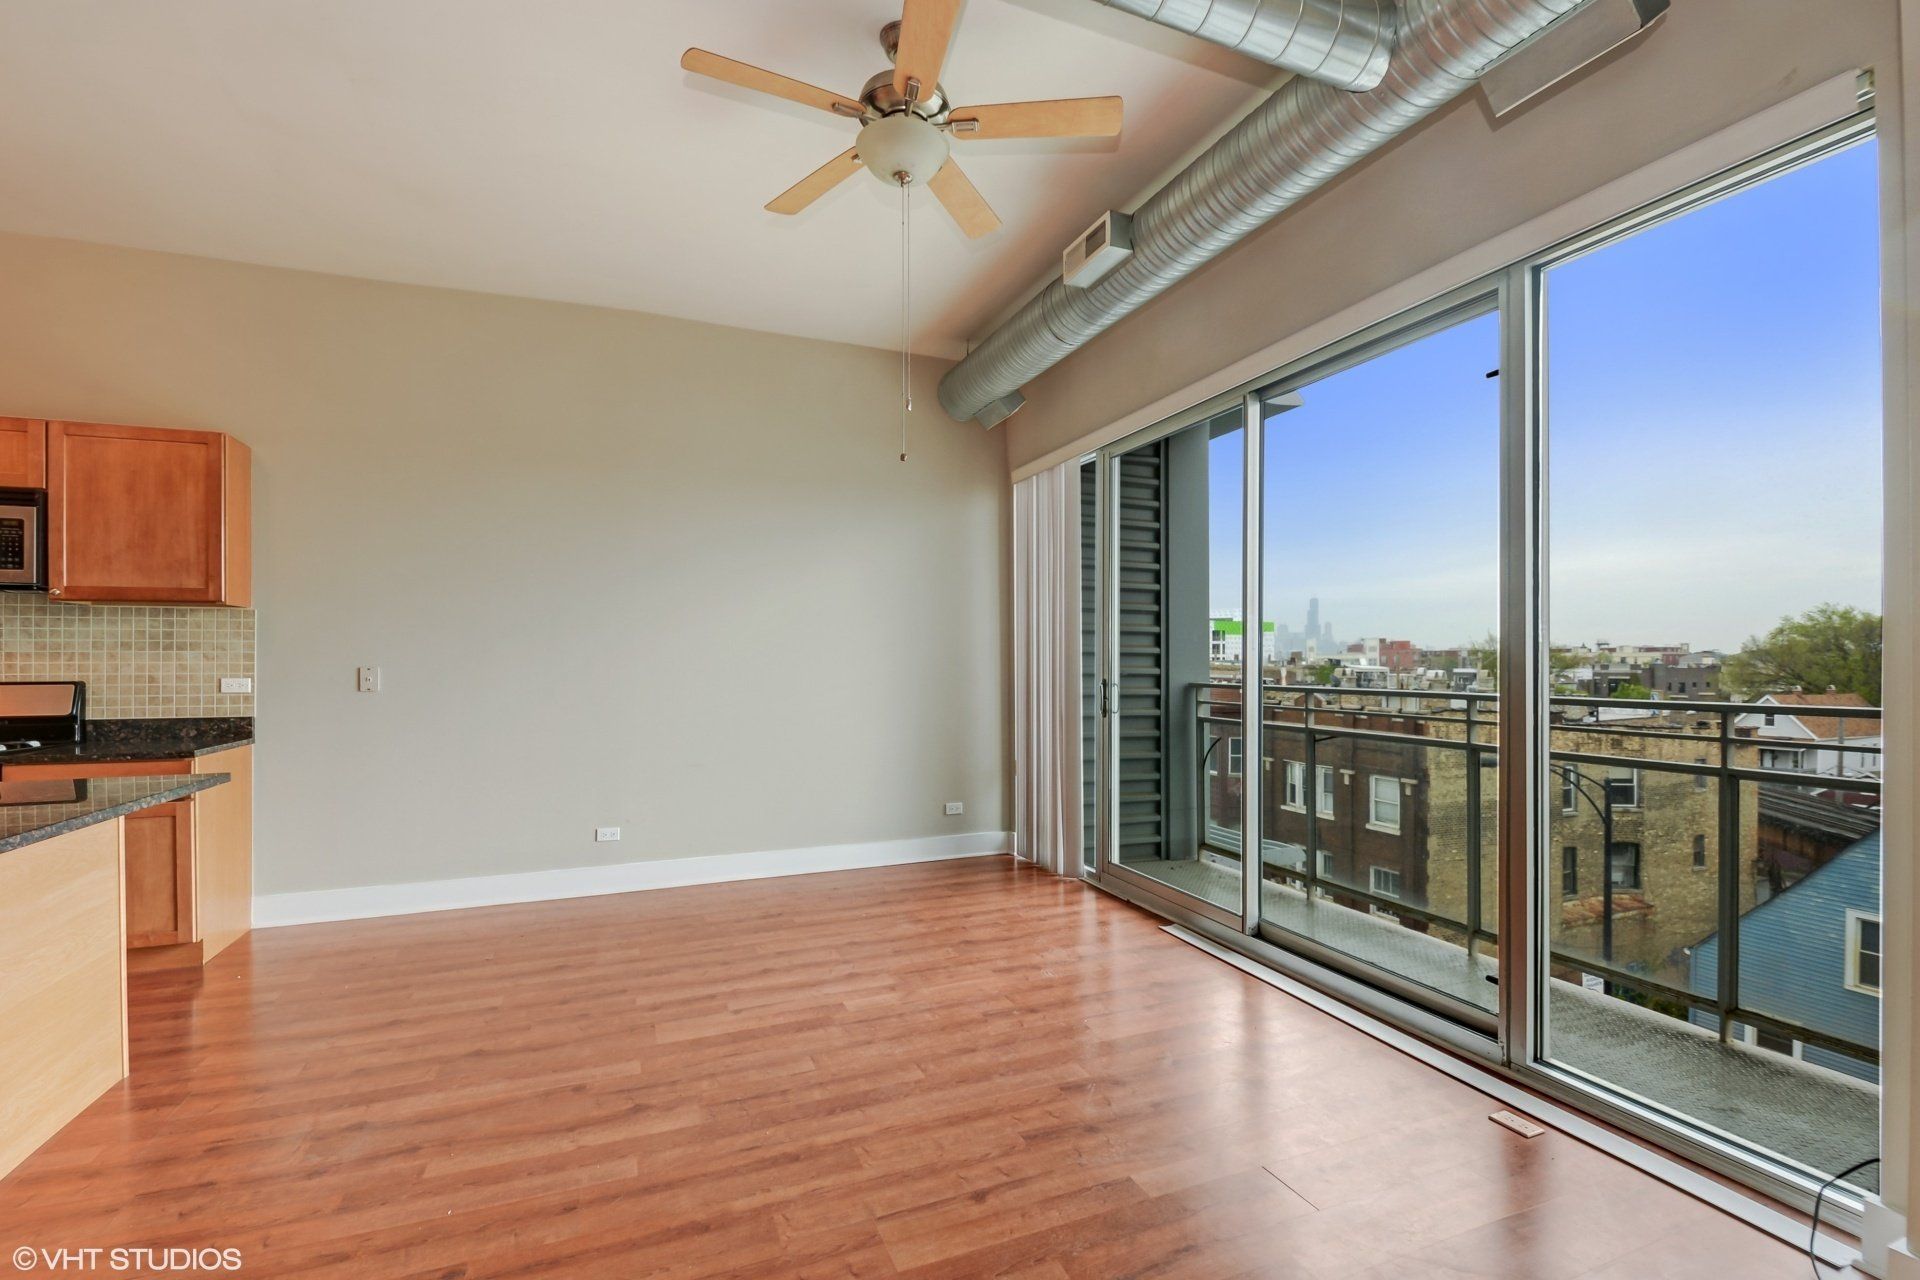 An empty apartment with hardwood floors and a ceiling fan at 2000 N Milwaukee Apartments.